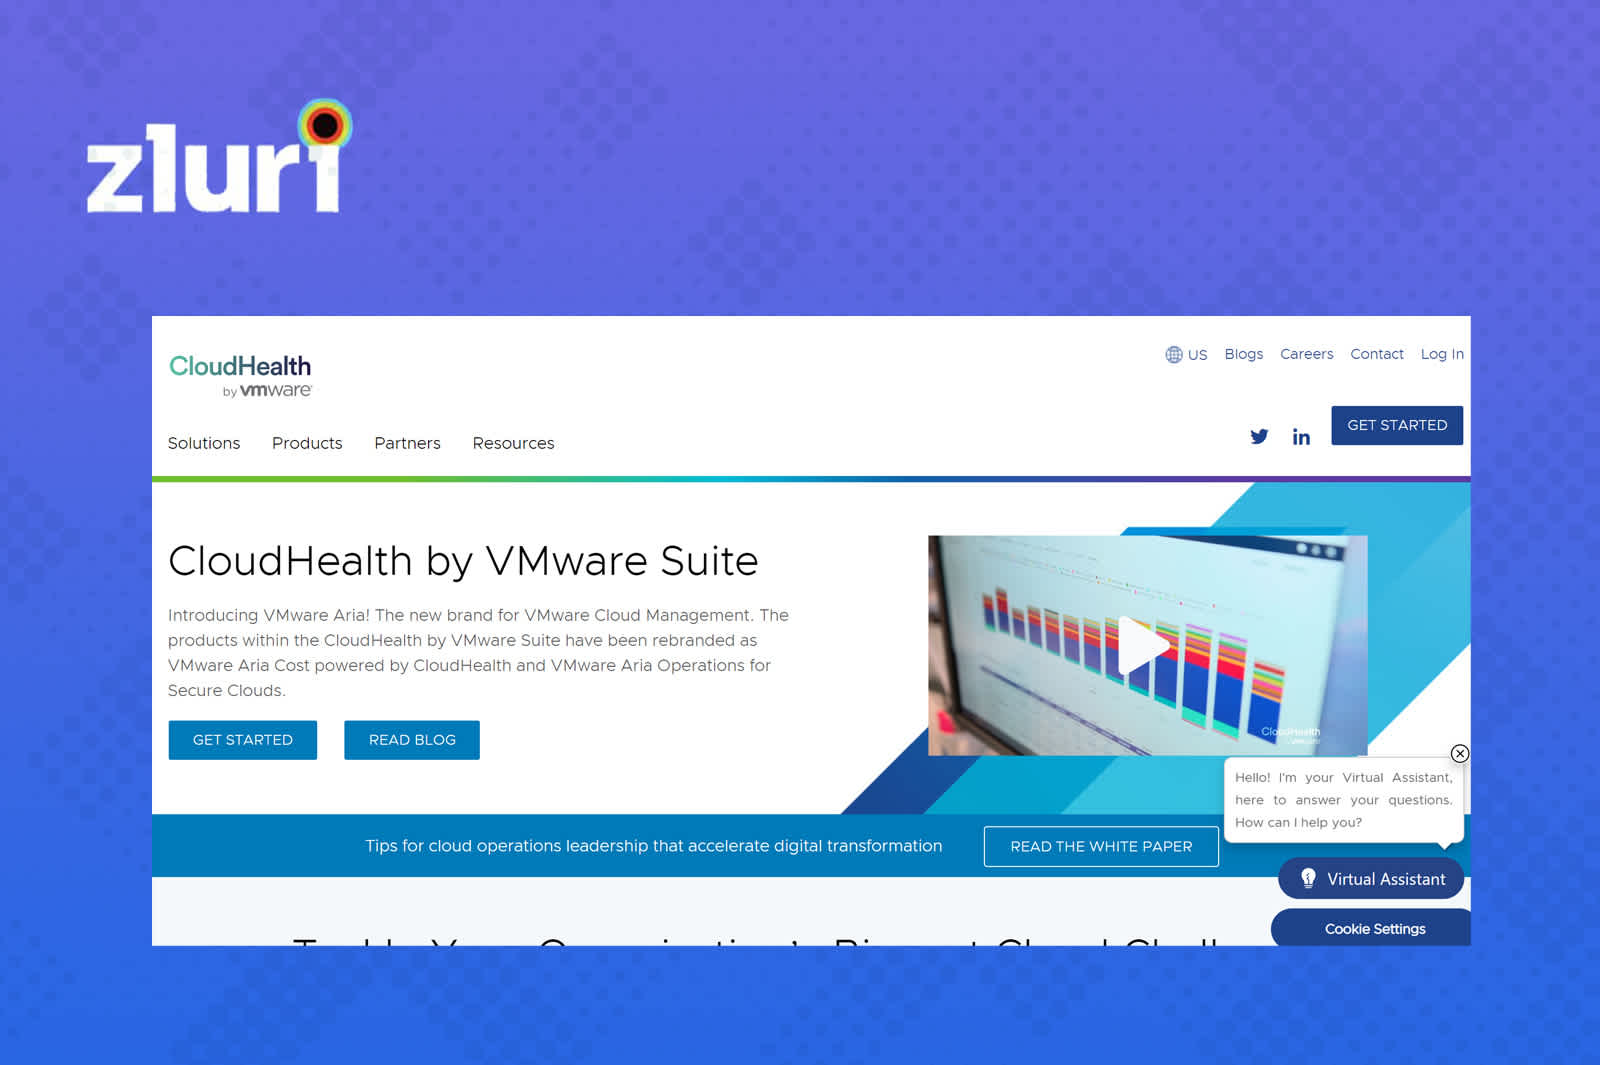 CloudHealth by VMware